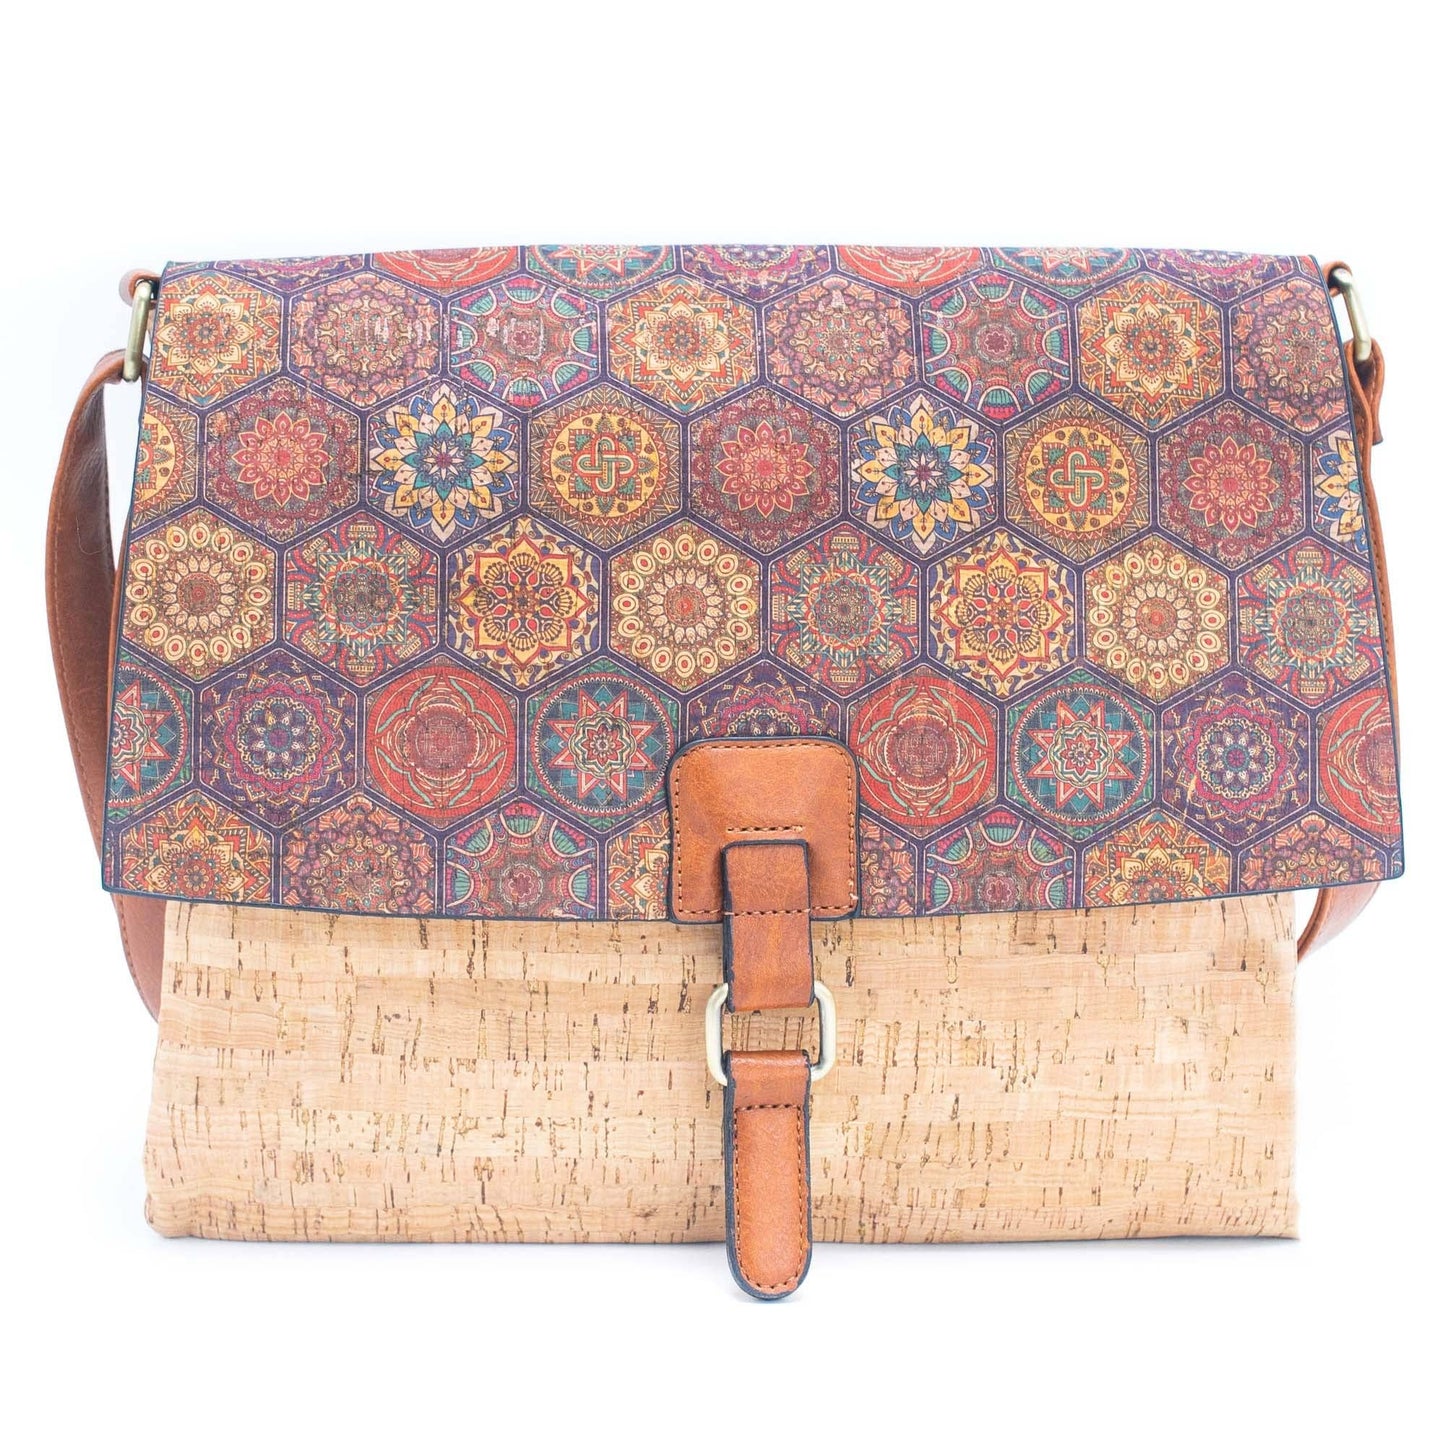 Cork Crossbody Bag with Mosaic and Floral Prints BAGD-464-6